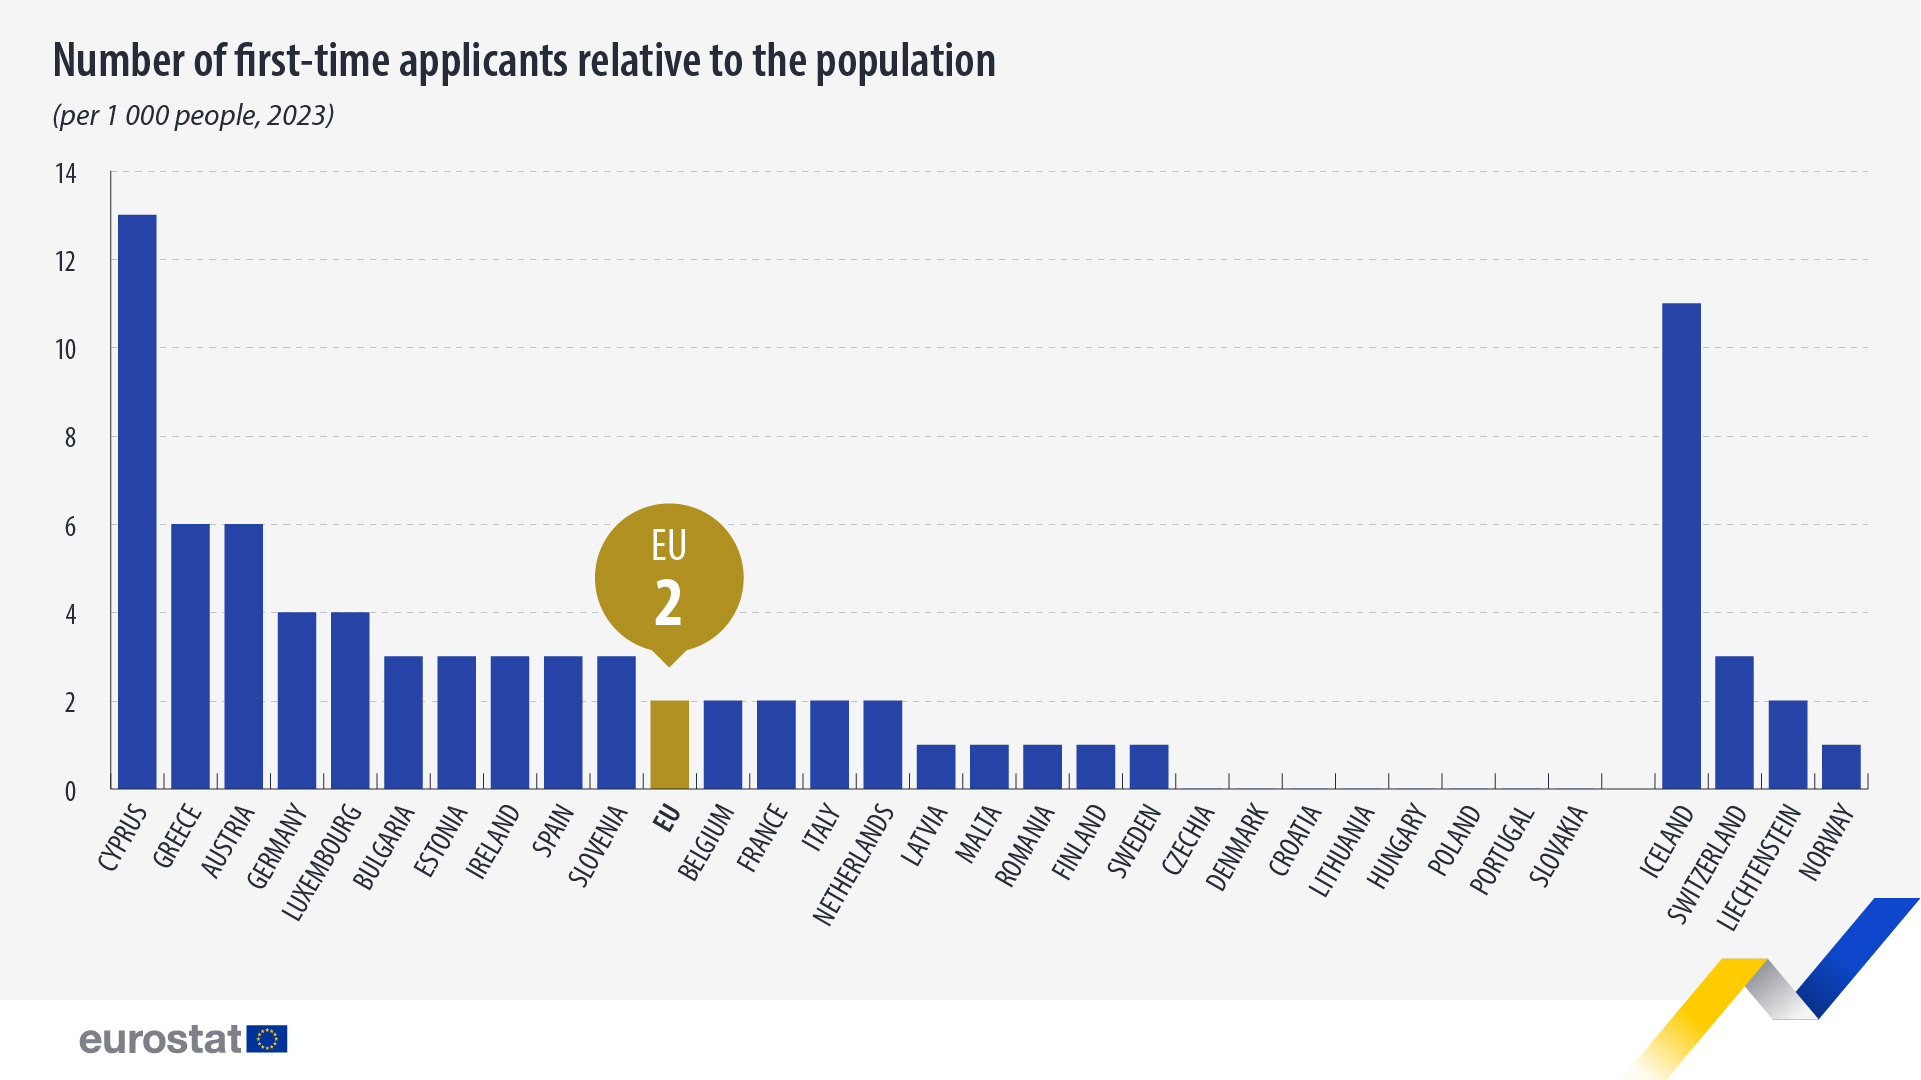 Number of first-time applicants relative to the population, per 1 000 people, 2023. Chart. See link to full dataset below.